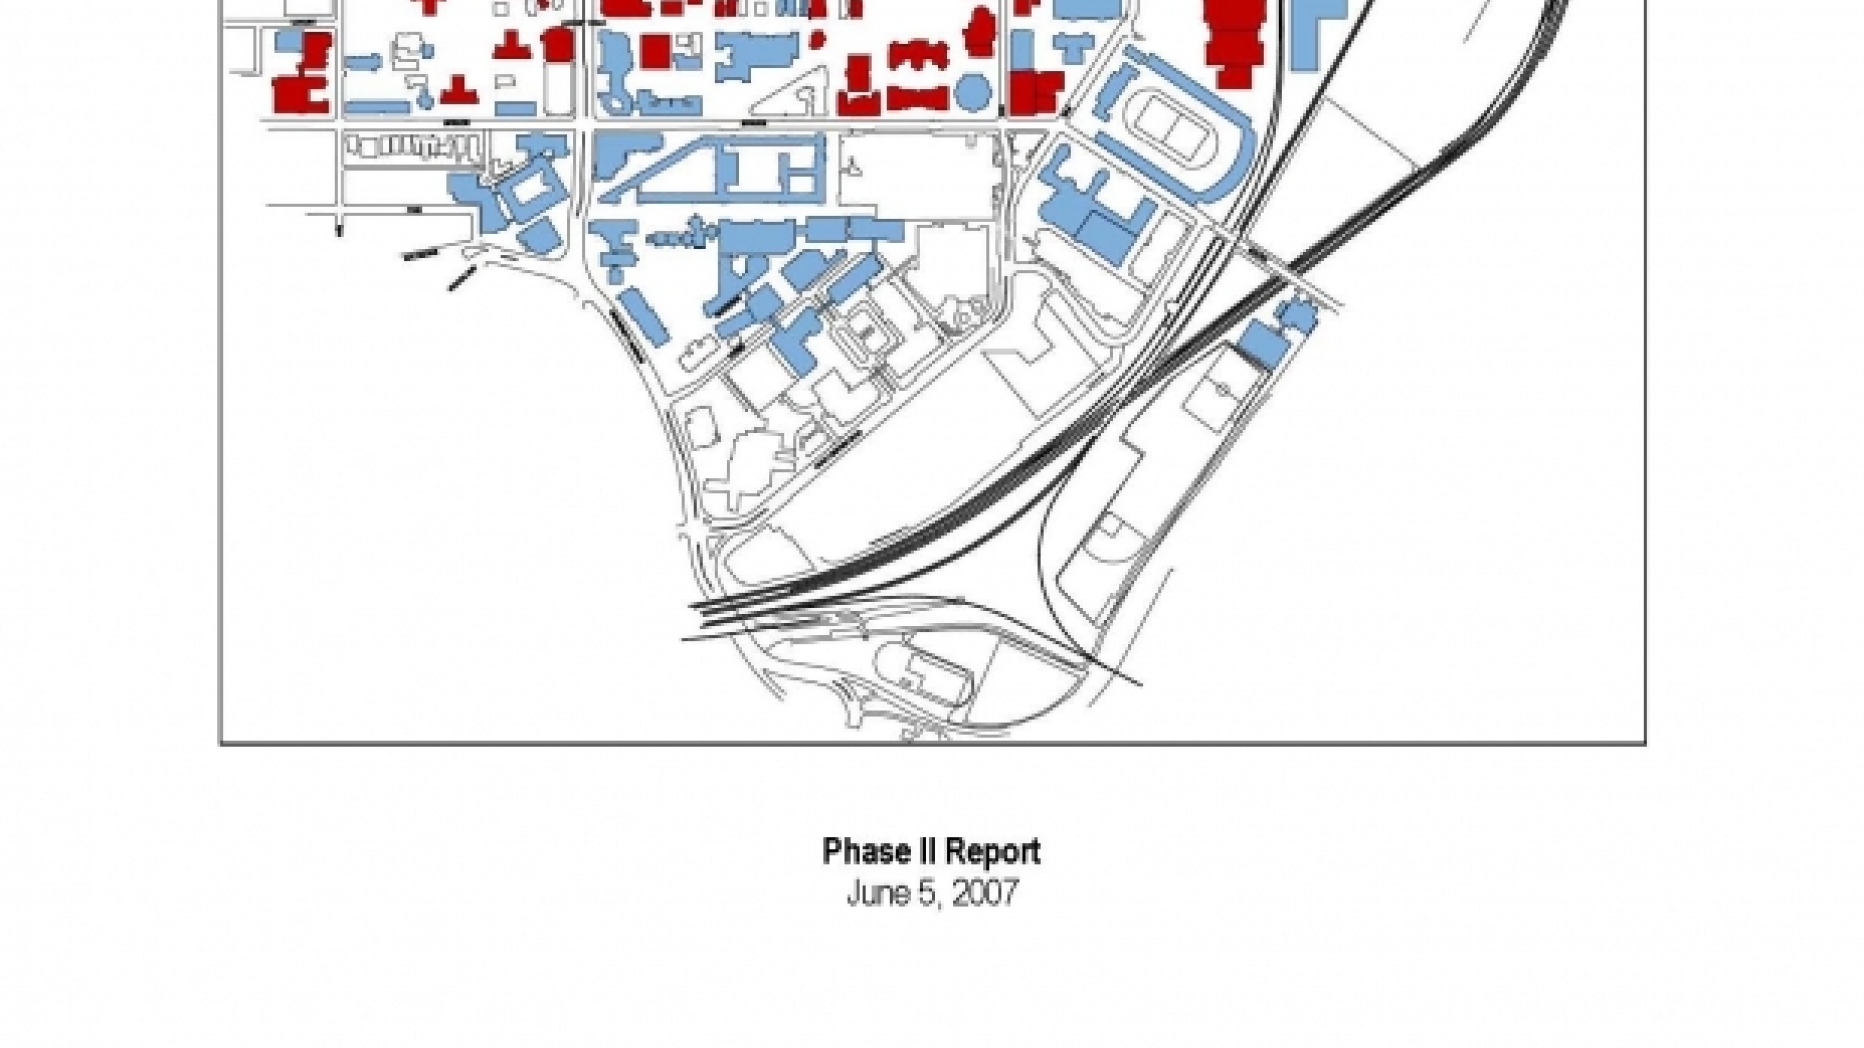 Map of the campus buildings